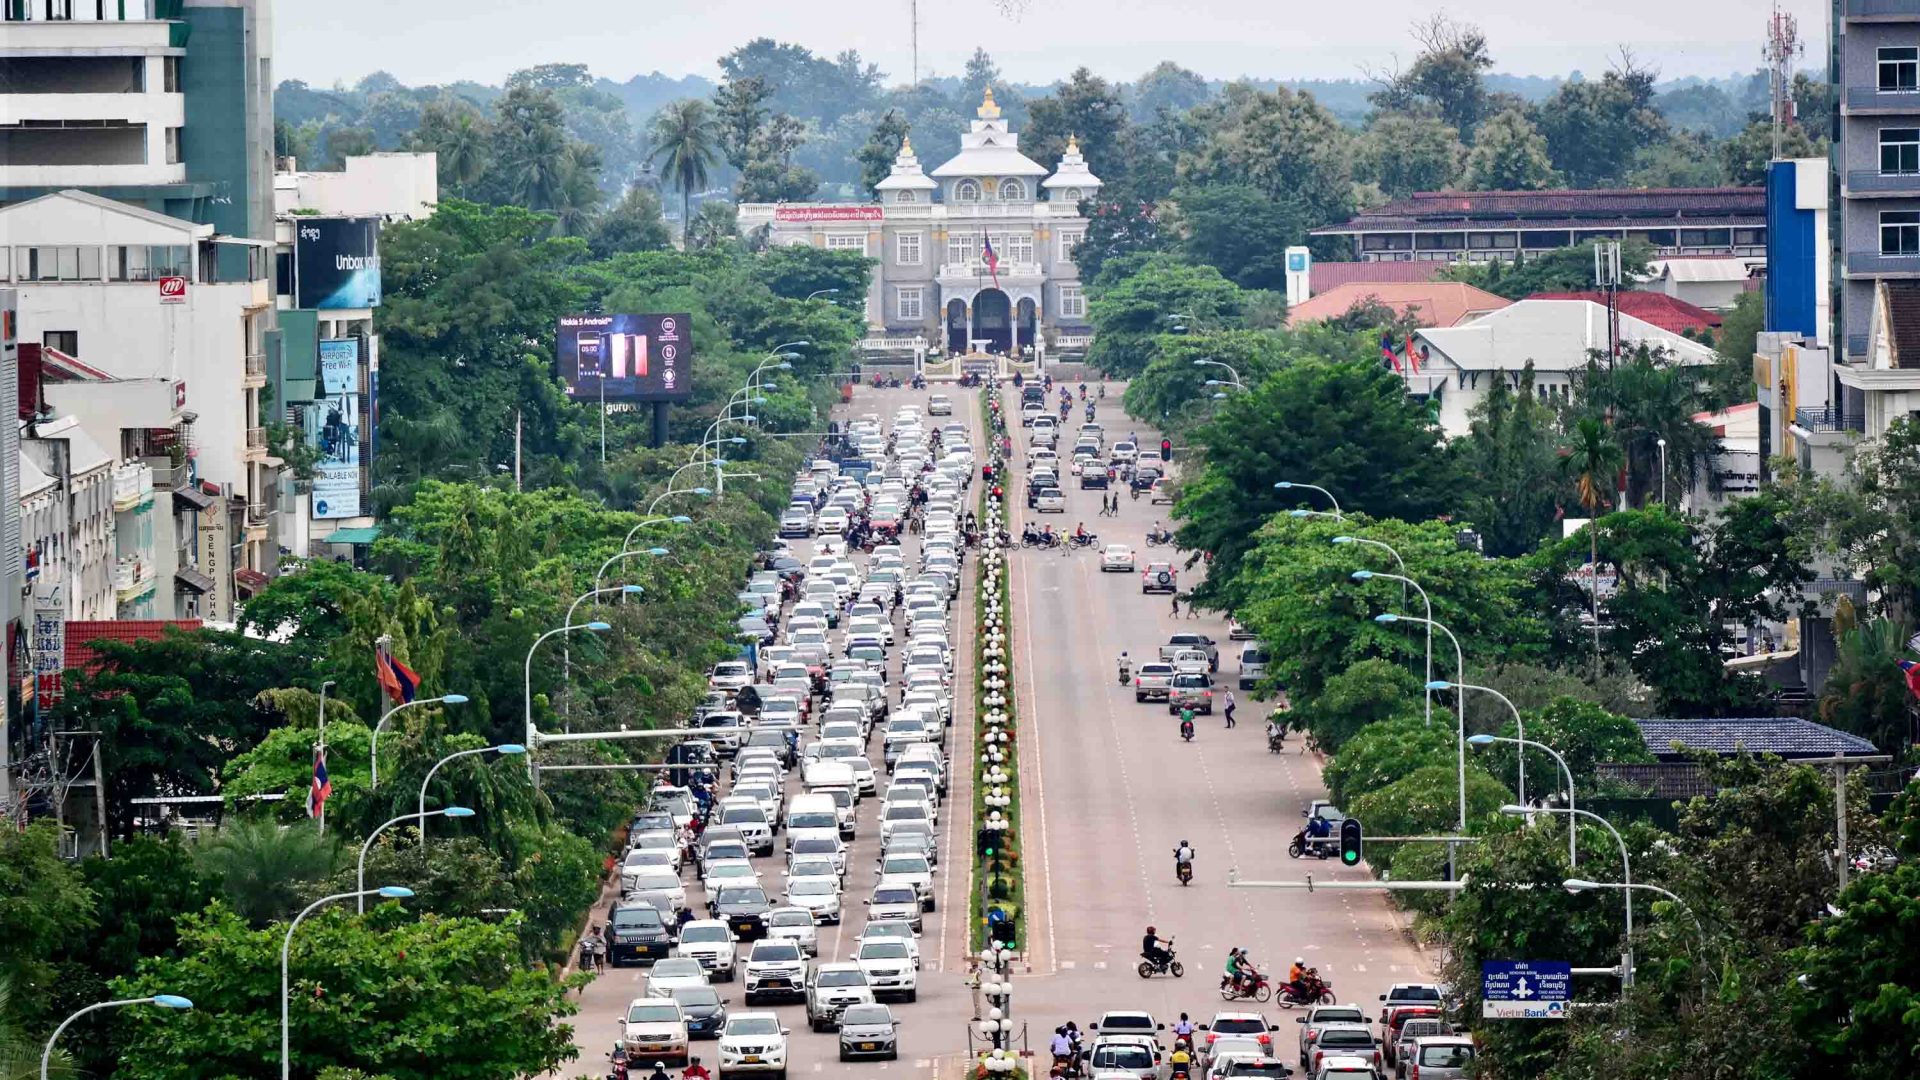 A street in Vientiane, Laos. It has trees on each side and a lot of traffic. The photo is taken from up high, looking down.